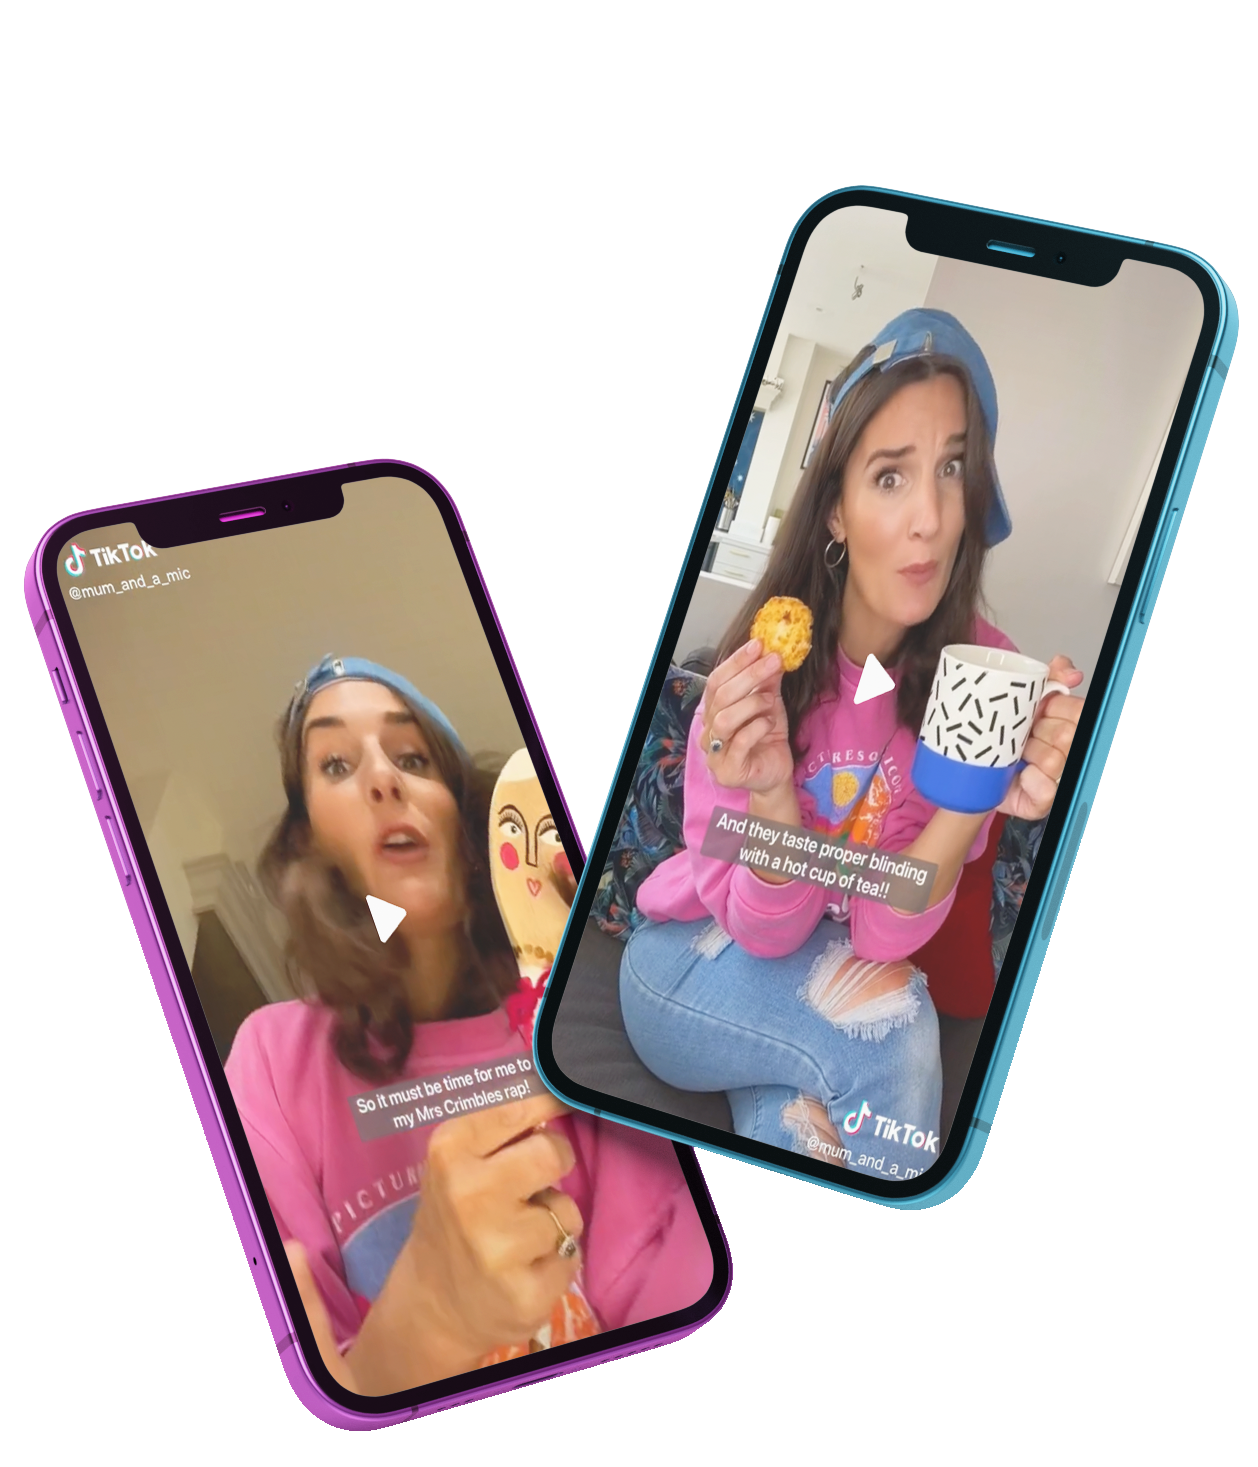 Two phones with a woman holding a cup and a cookie on the screen.